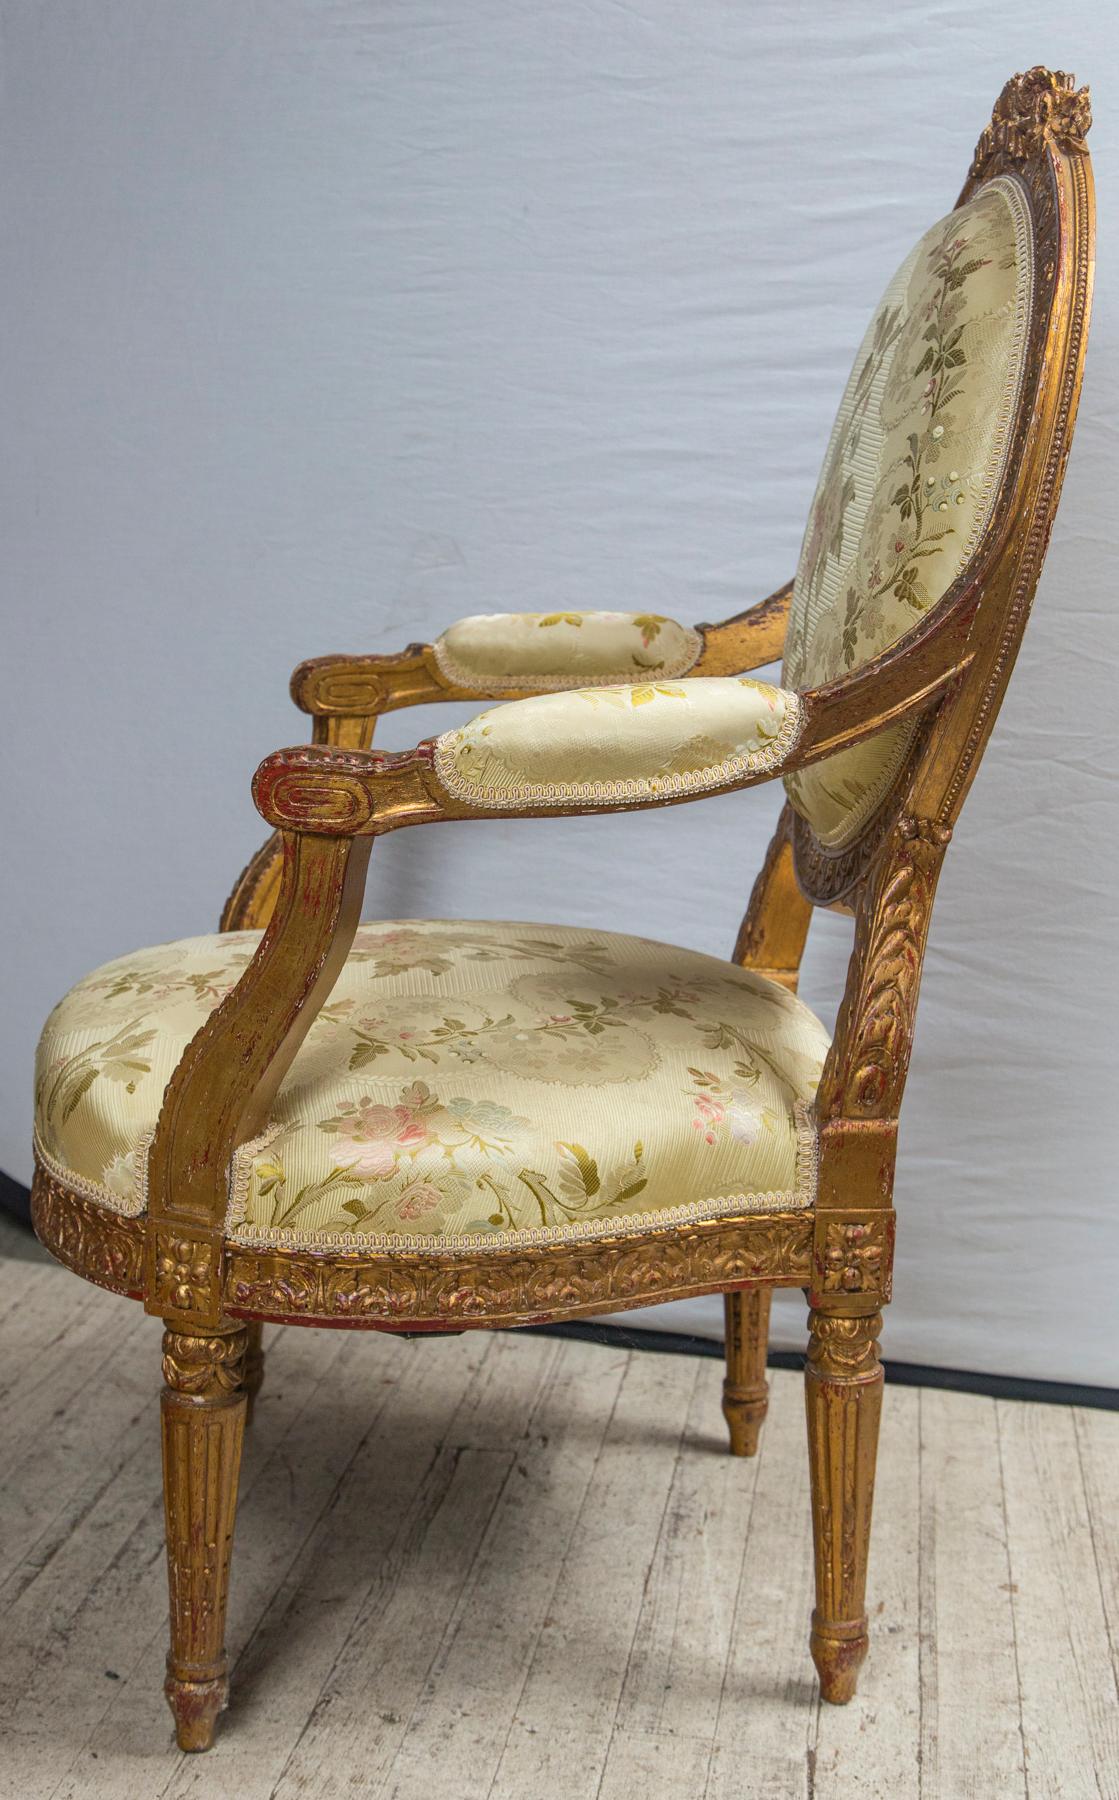 The round upholstered back topped with a hand carving of roses, other flowers and a ribbon. The entire frame carved with leaf decoration. Fluted tapering legs in the Louis XVI manner. Well detailed carving.
Wide spreading padded arms, wide and deep